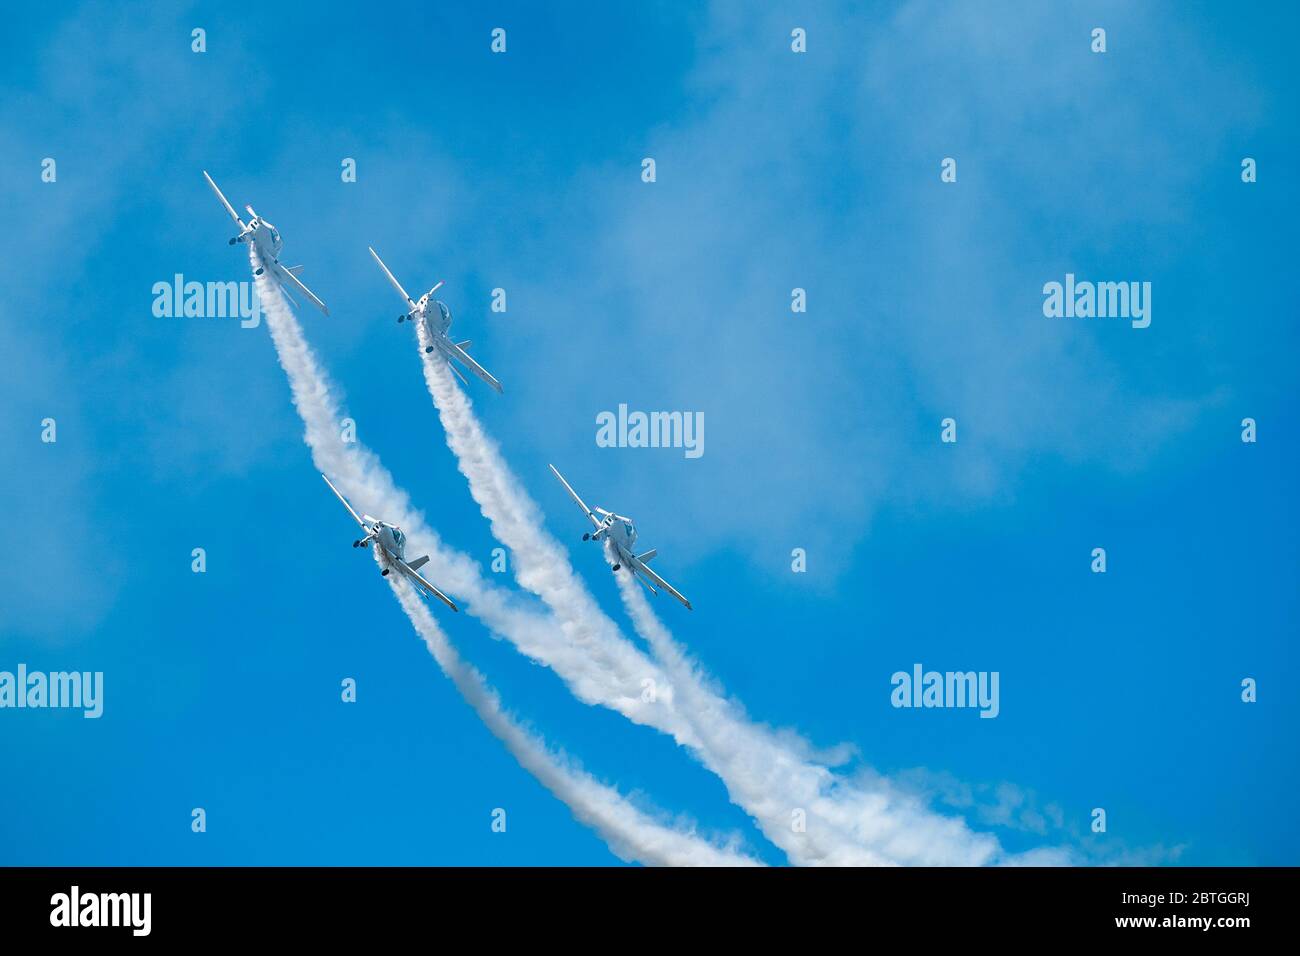 Airplanes with white smoke traces on air show. Pilots make tricks on jets at blue sky background. Stock Photo